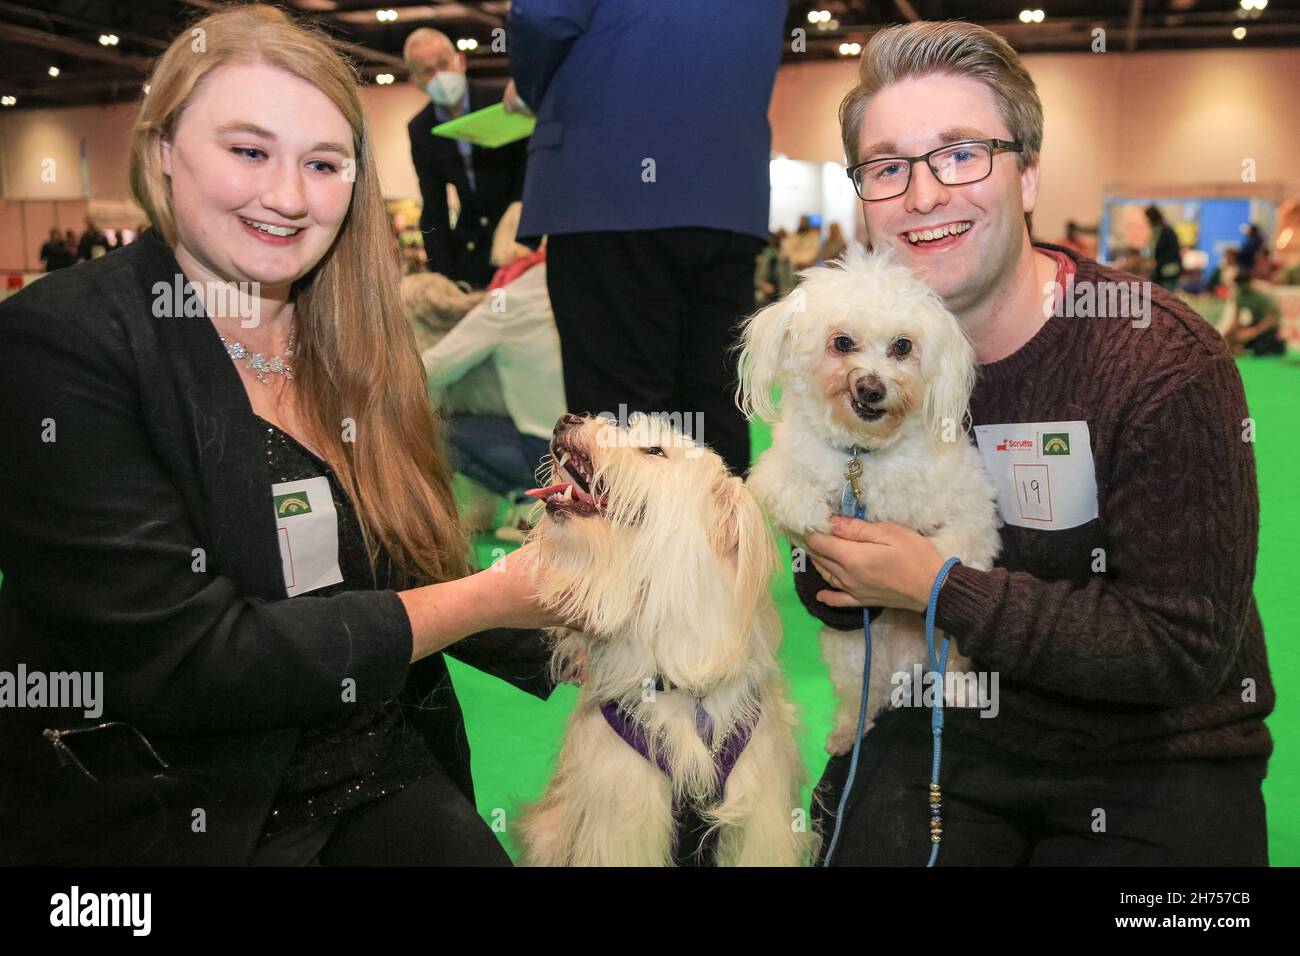 Excel Exhibition Centre, London, UK. 20th Nov, 2021. Mopsie (dog on left) and Sammie (dog on right) are two rescue cross breed dogs at the show with their lovely owners, and competing in Crufts 'most handsome dogs' competition. London's biggest dog event, Discover Dogs, returns to ExCeL London, giving visitors the opportunity to meet, greet and cuddle hundreds of dogs, and to celebrate the ways in which man's best friend helped thousands and have been our everyday heroes during the pandemic. The show is organised by The Kennel Club. Credit: Imageplotter/Alamy Live News Stock Photo